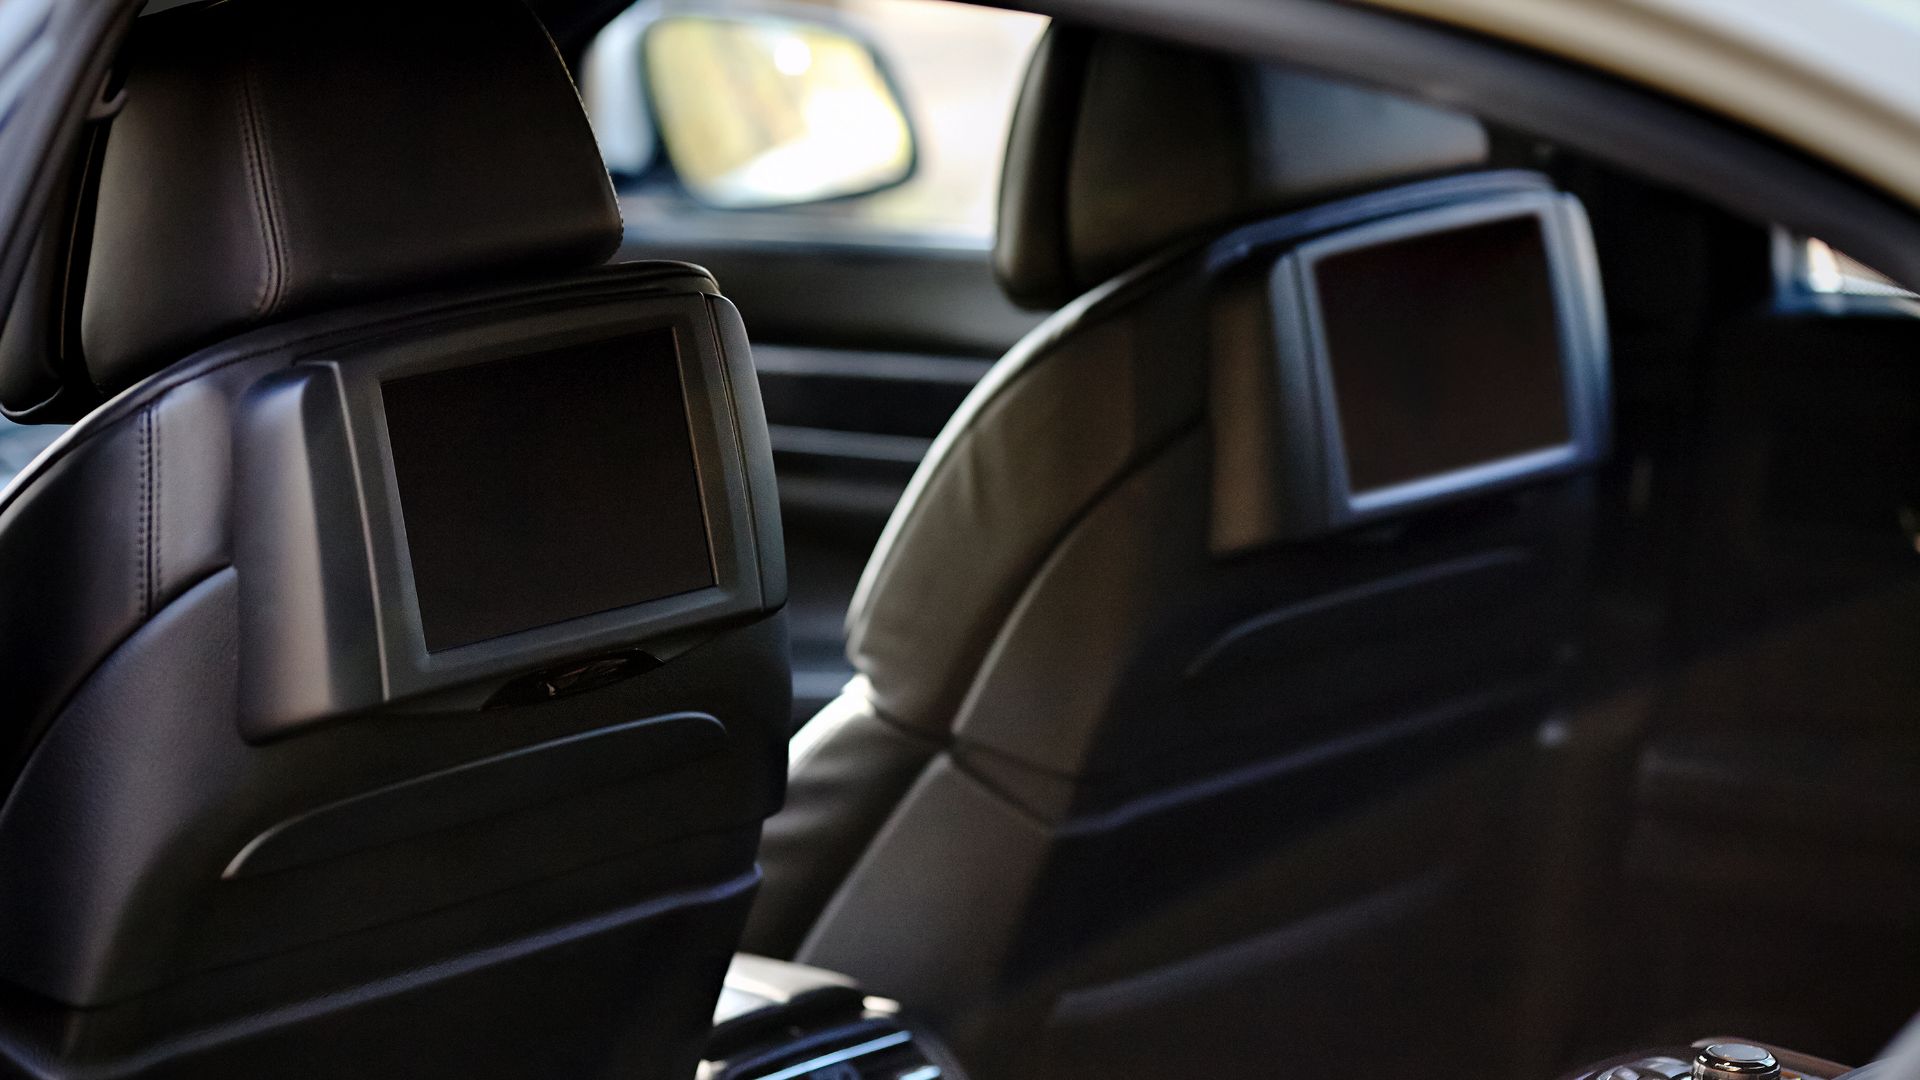 a view of the back seats of a car.